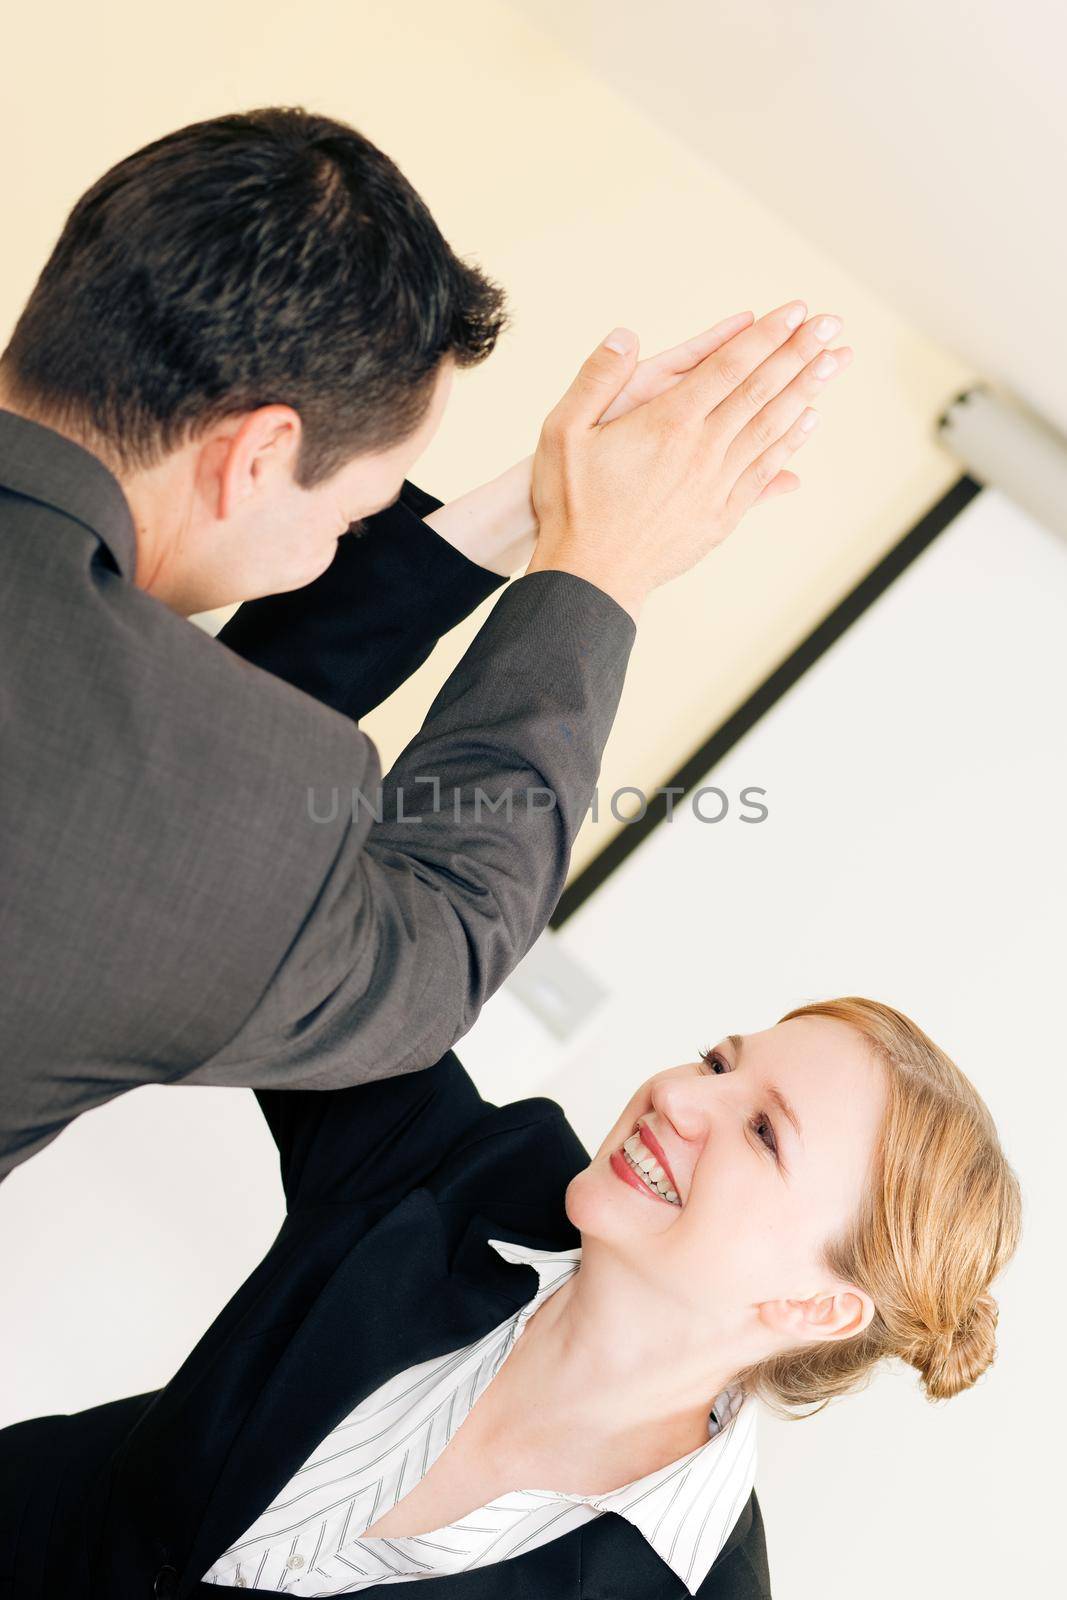 Two people in Business giving each other a high five for a successful transaction